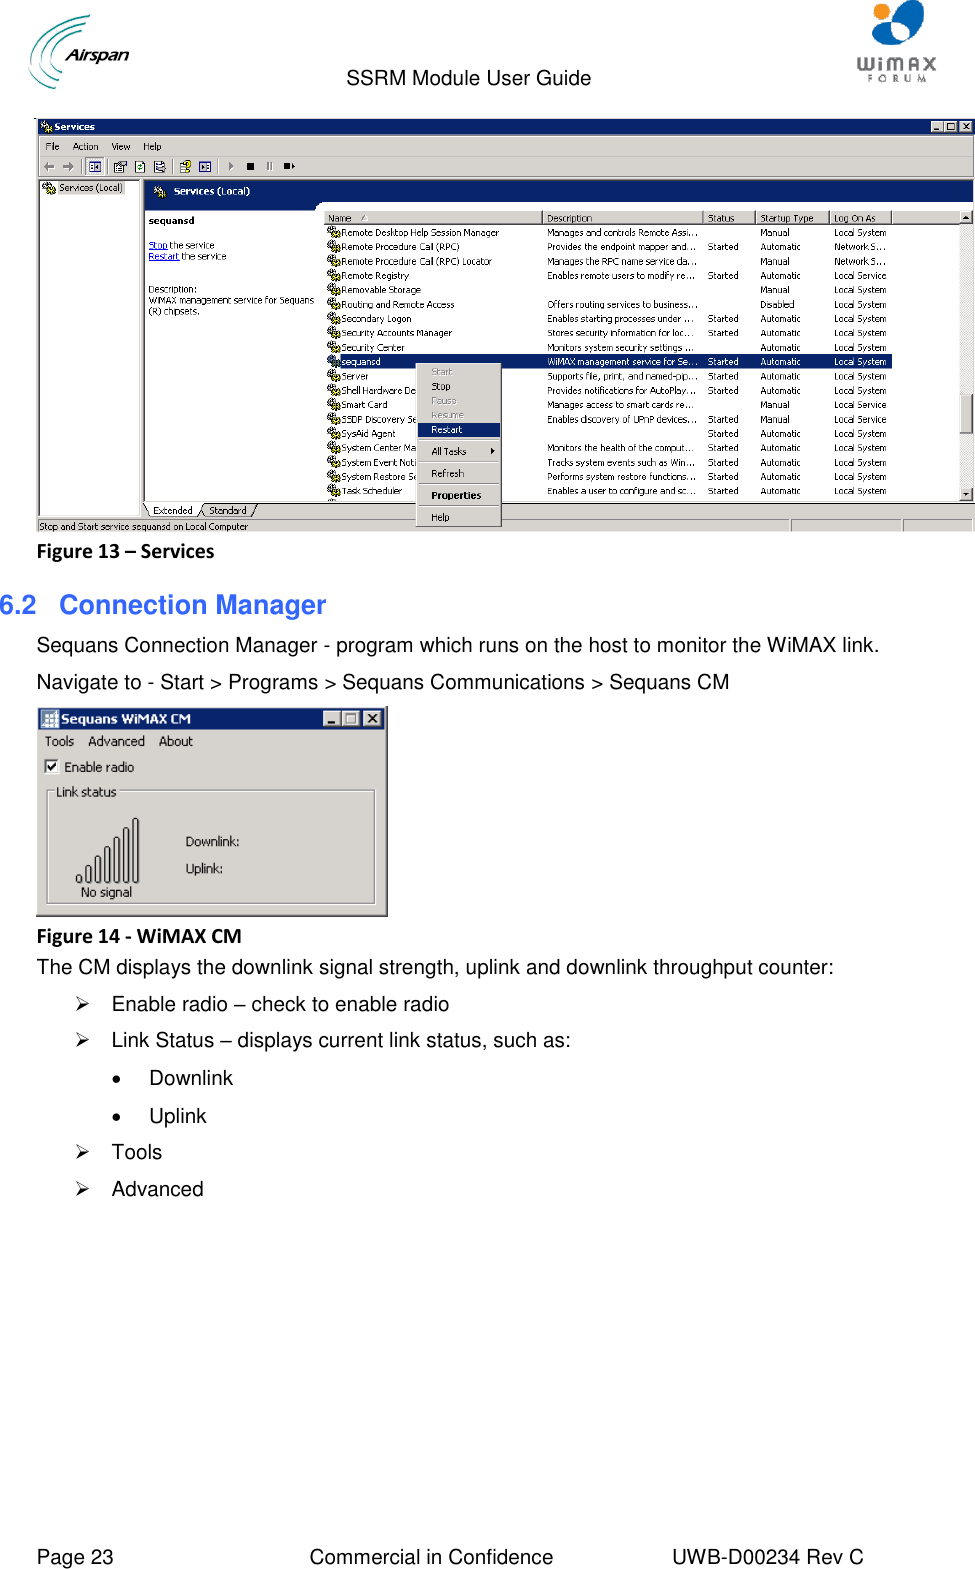                                  SSRM Module User Guide     Page 23  Commercial in Confidence  UWB-D00234 Rev C     Figure 13 – Services 6.2 Connection Manager Sequans Connection Manager - program which runs on the host to monitor the WiMAX link. Navigate to - Start &gt; Programs &gt; Sequans Communications &gt; Sequans CM  Figure 14 - WiMAX CM The CM displays the downlink signal strength, uplink and downlink throughput counter:   Enable radio – check to enable radio   Link Status – displays current link status, such as:   Downlink   Uplink   Tools   Advanced   